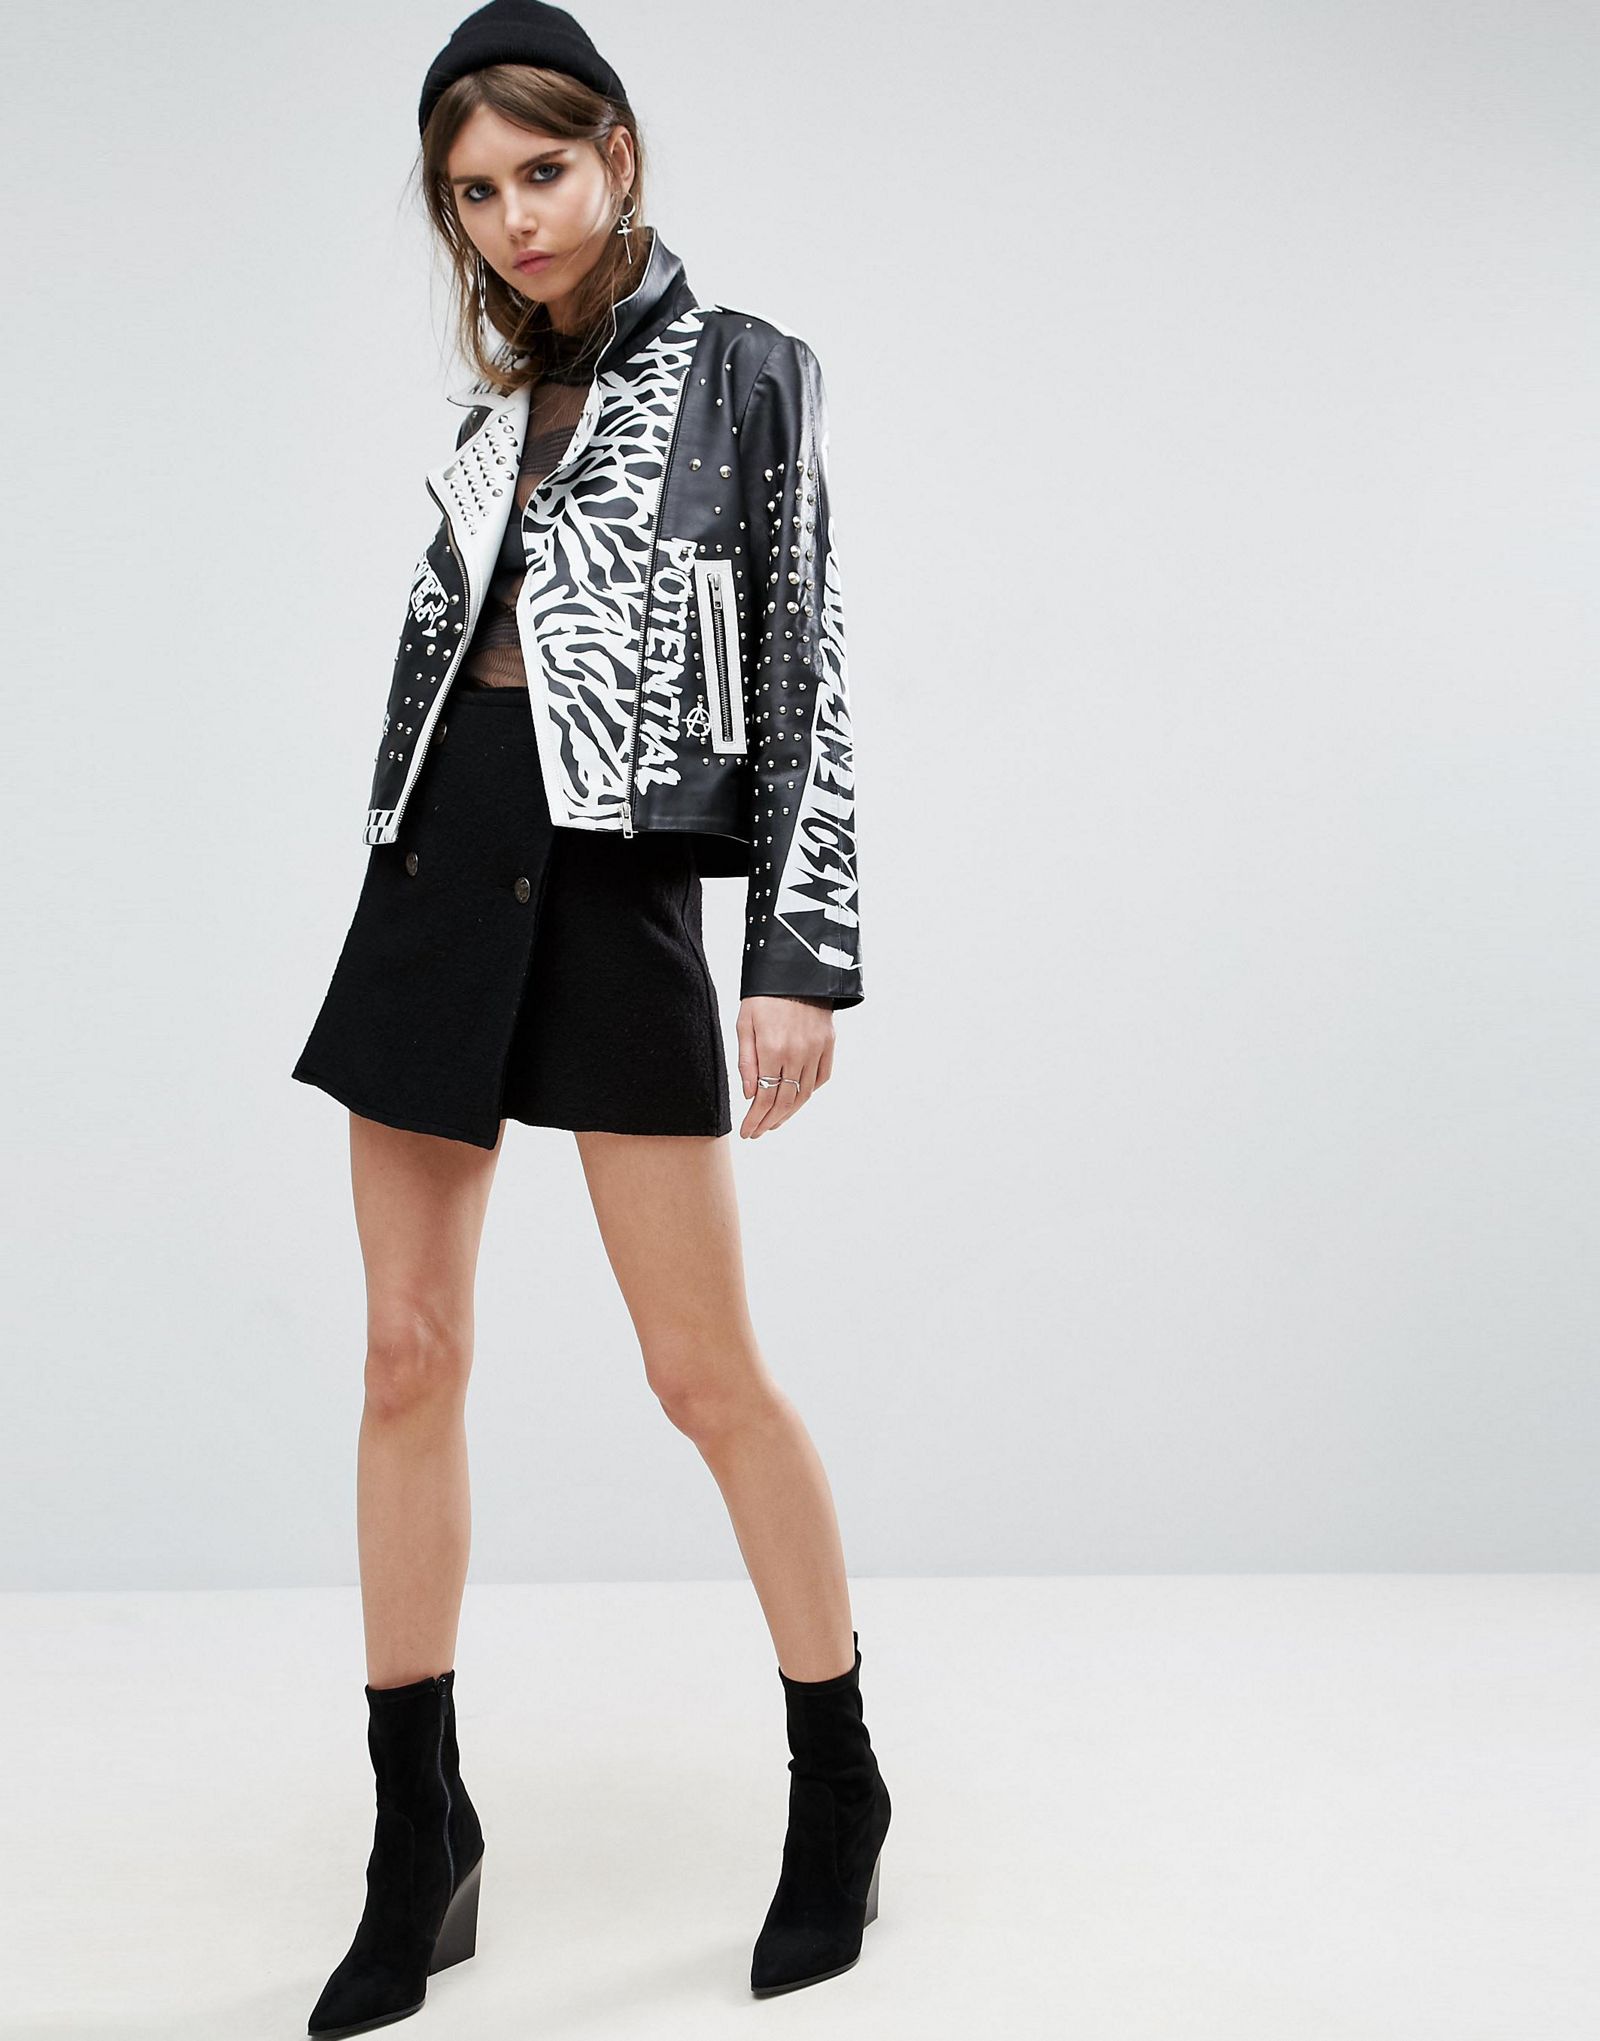 ASOS Punk Leather Biker Jacket with Studs